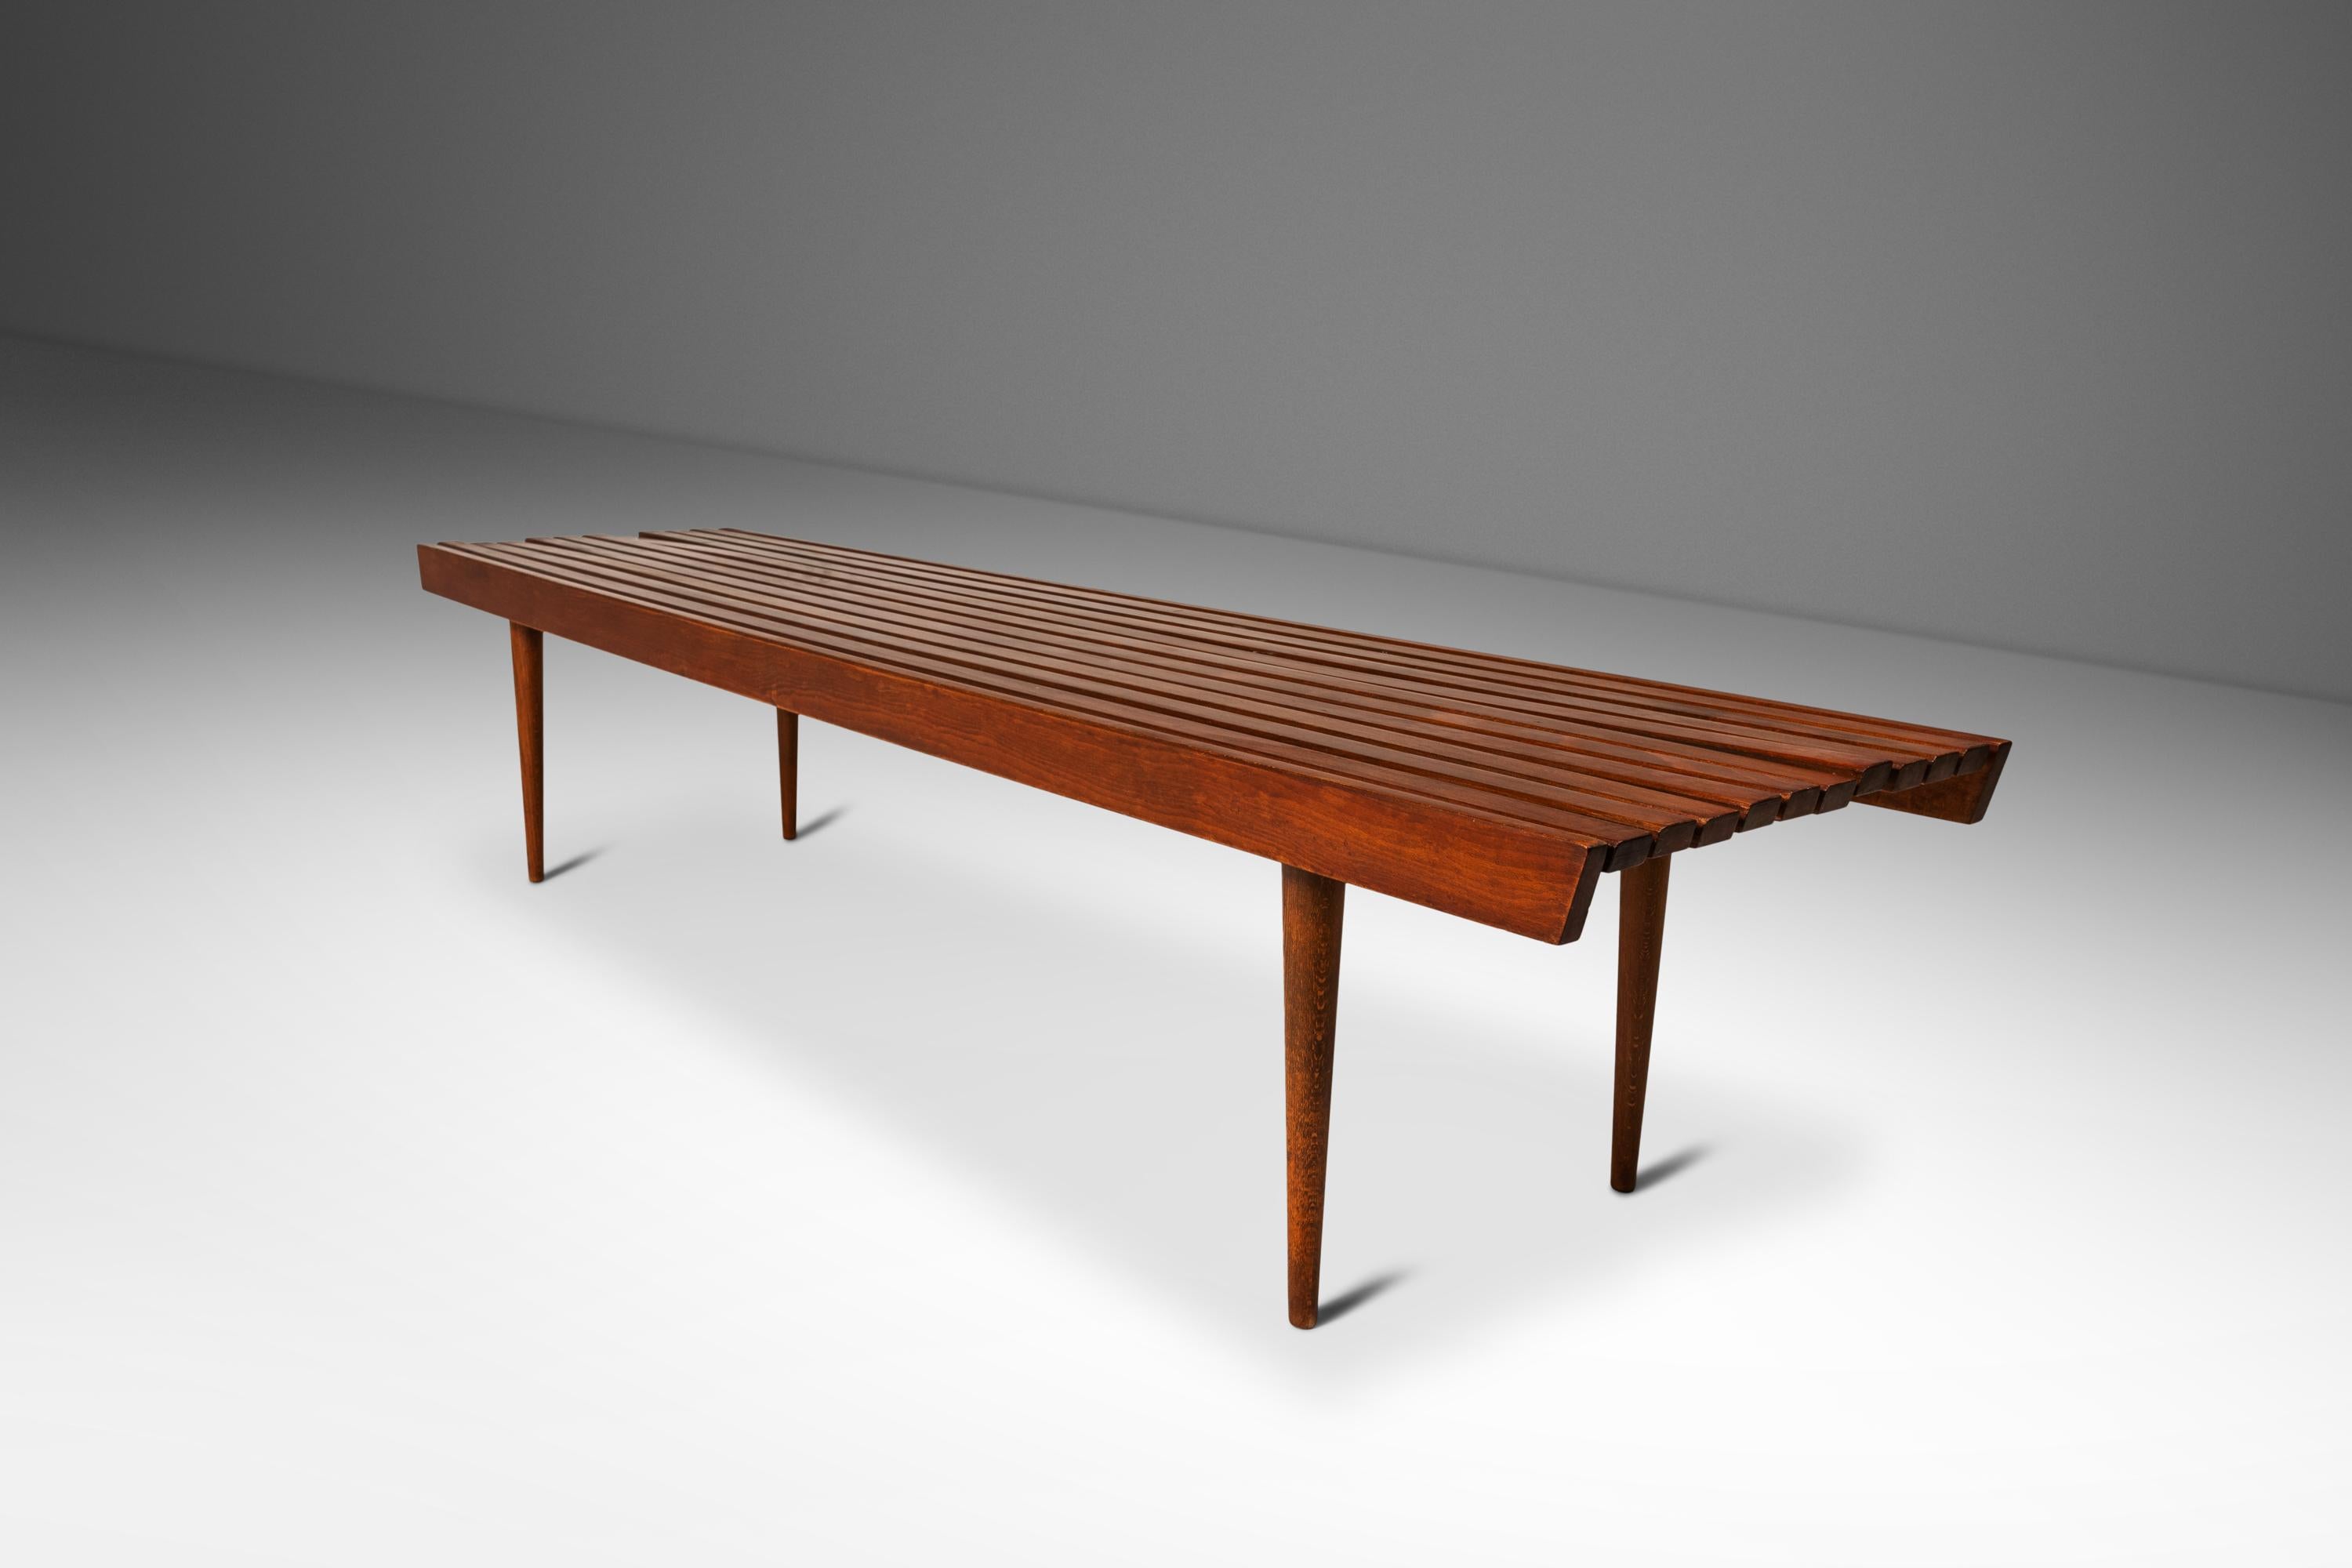 Introducing an iconic slatted minimalist bench made in Yugoslavia in the late 1950's. Constructed from solid bands of European walnut with exceptional woodgrains throughout this bench is the epitome of Mid-Century Minimalist design. Styled after